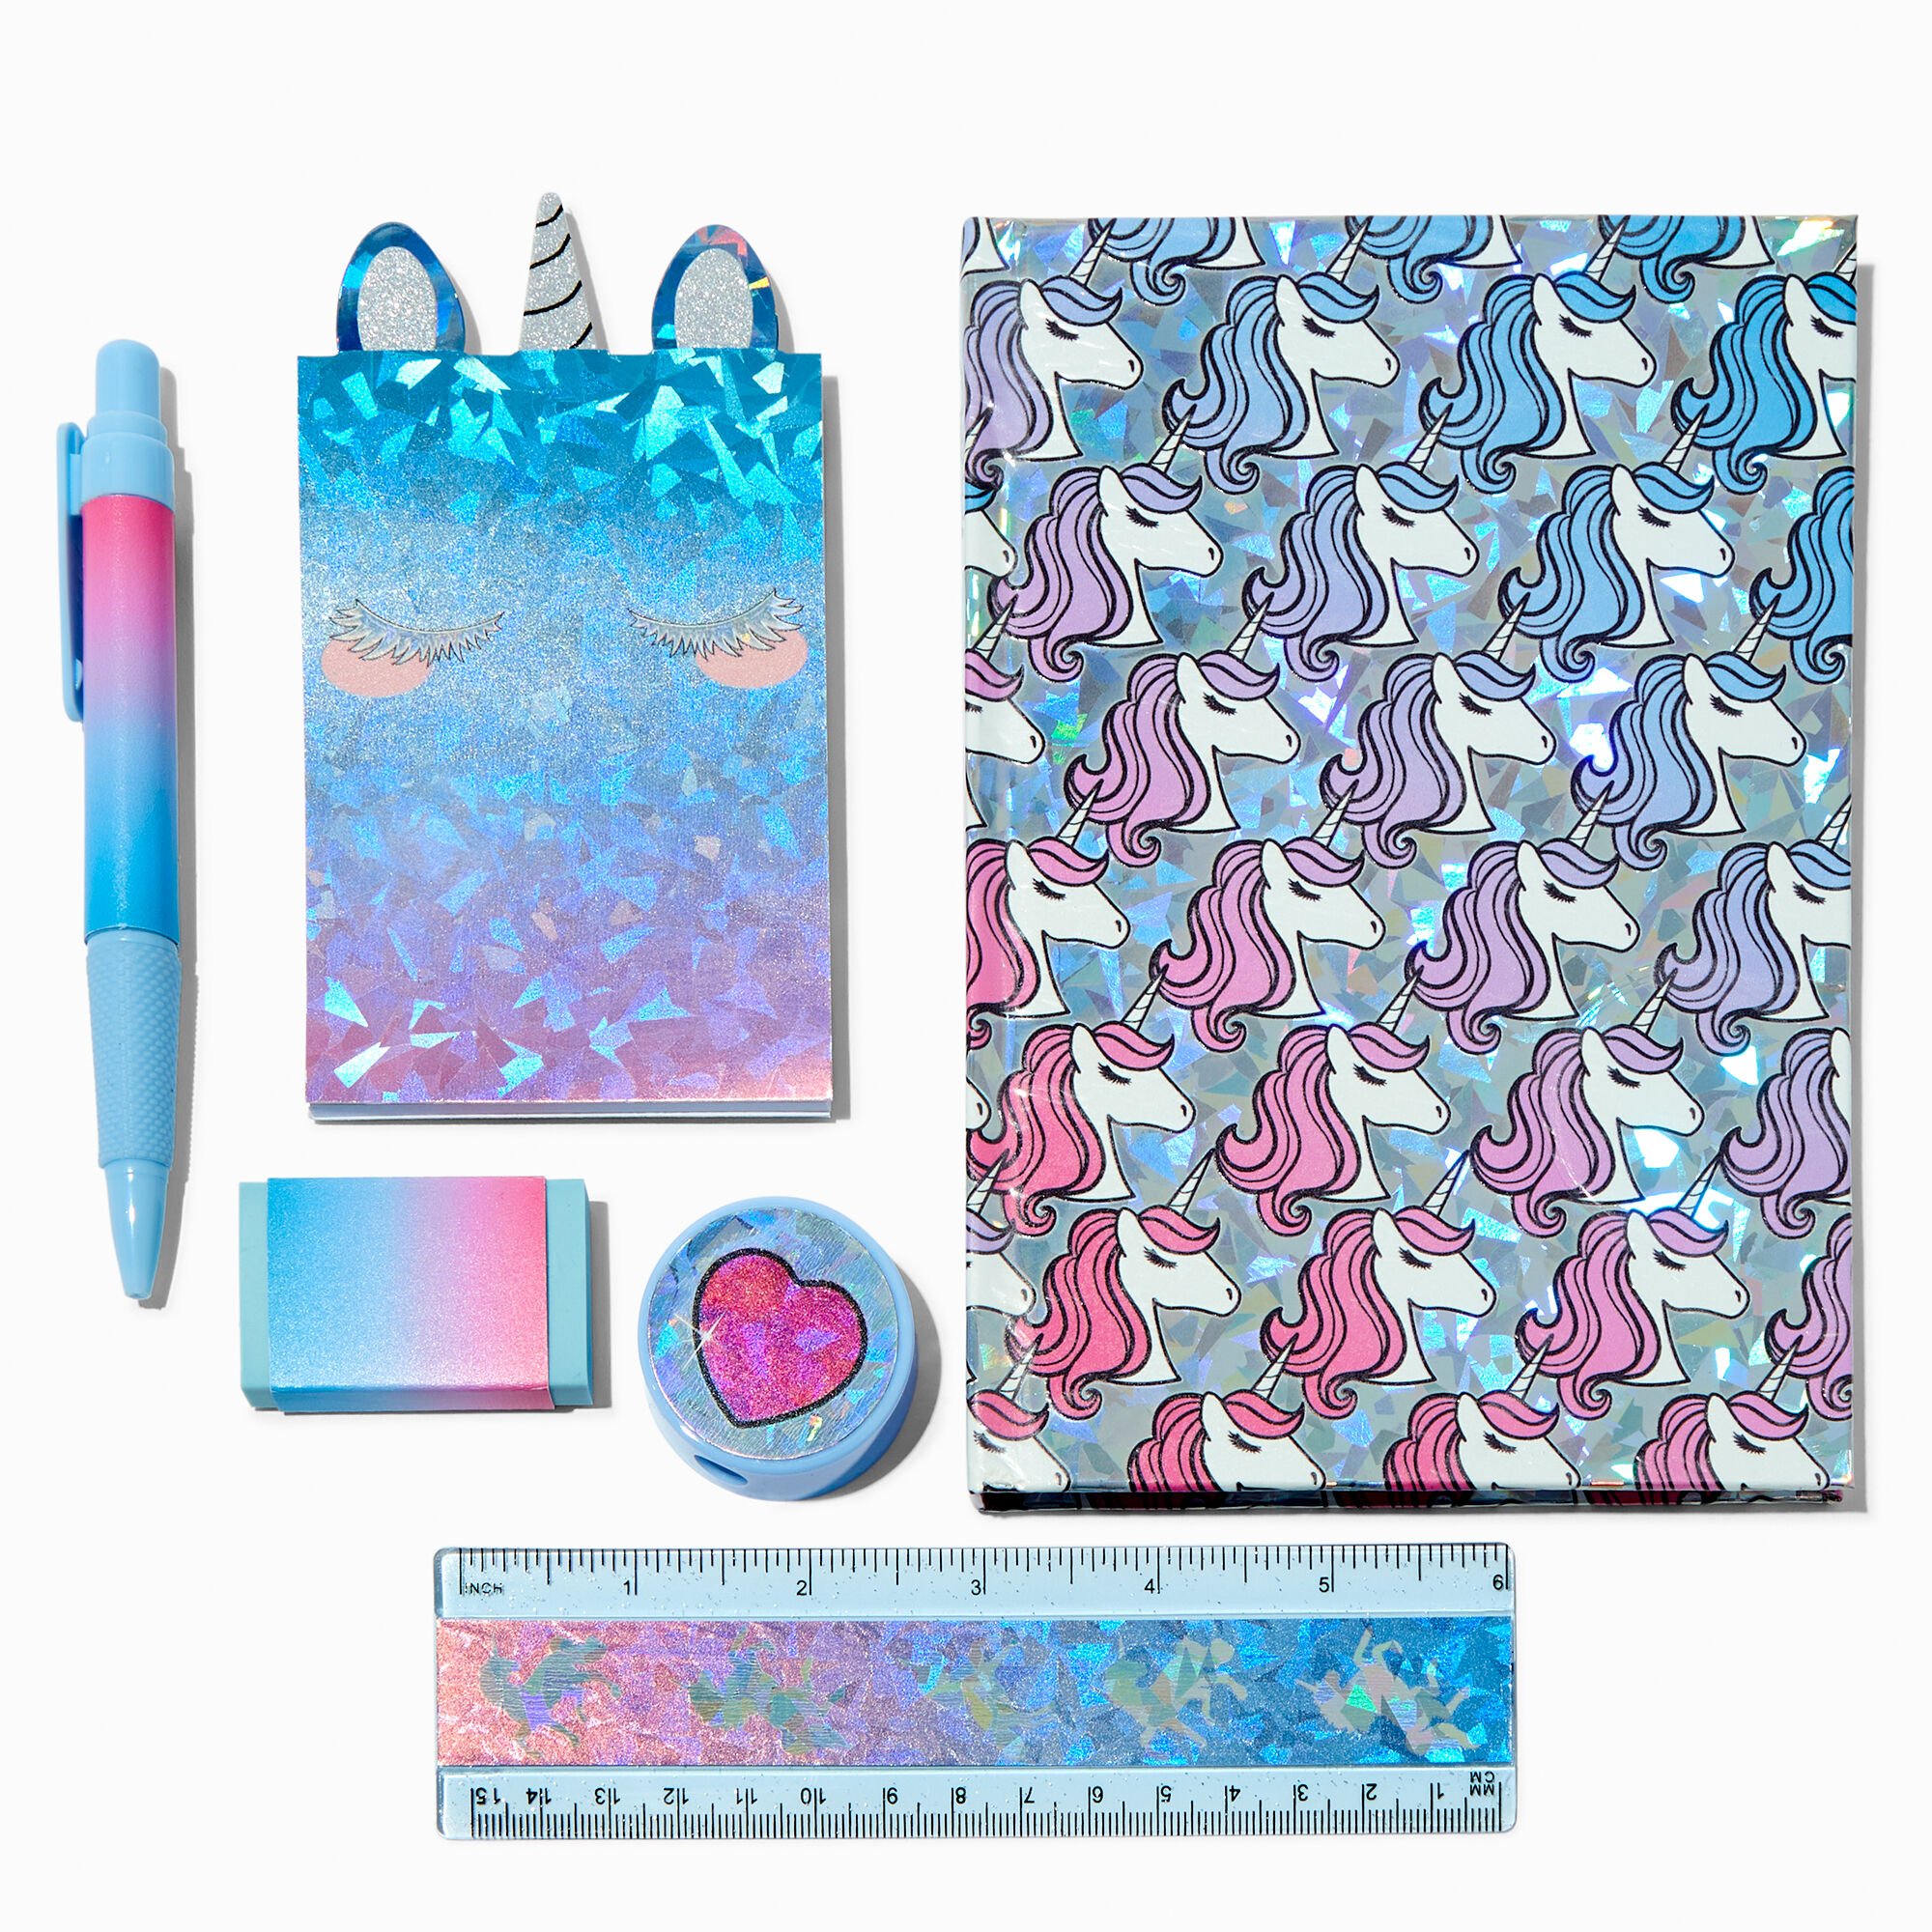 View Claires Iridescent Unicorn Stationery Set information